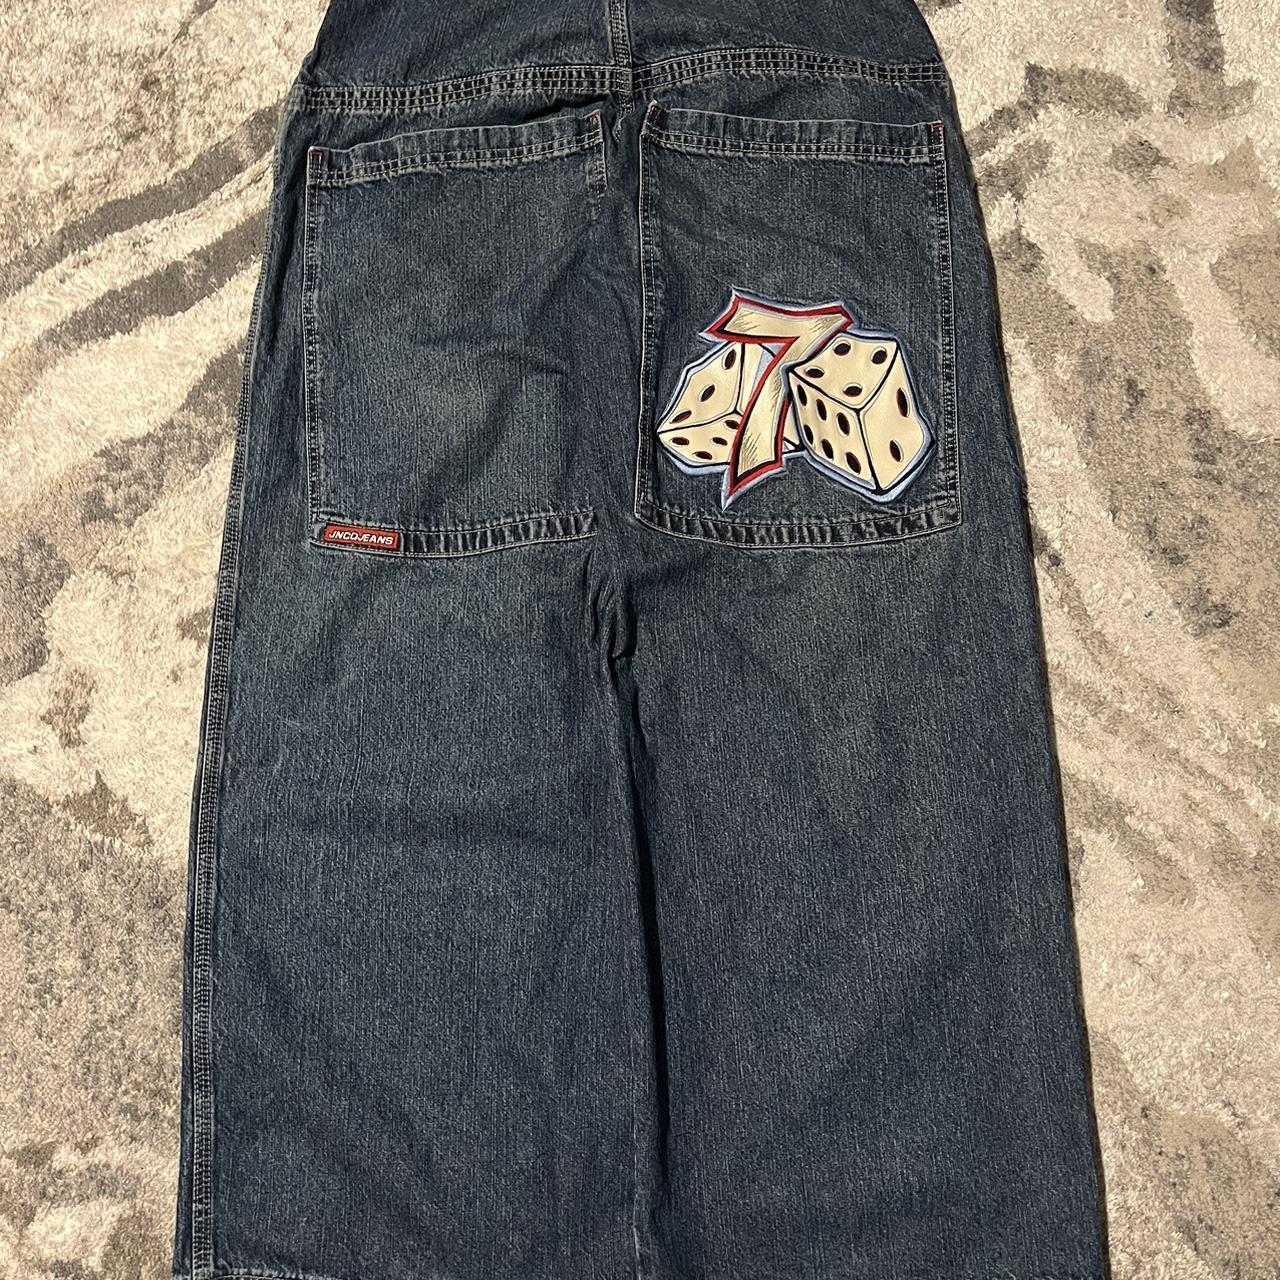 Jnco lucky 7 dice jeans -size 33x32 fits tts -... - Depop